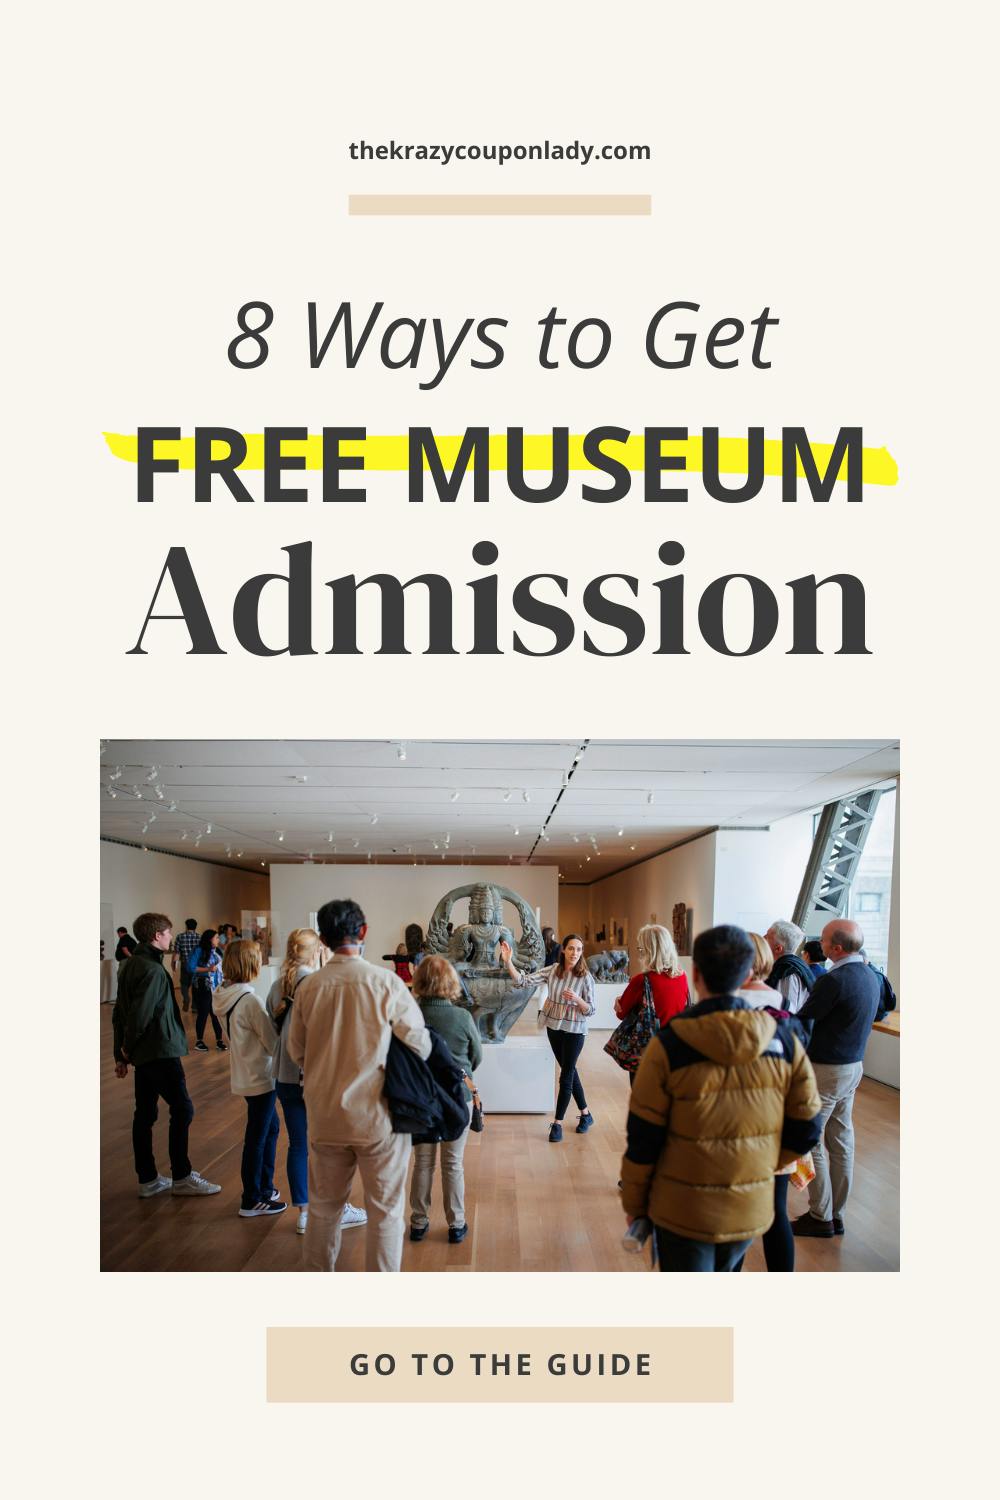 8 Easy Ways You Can Get Free Museum Admission